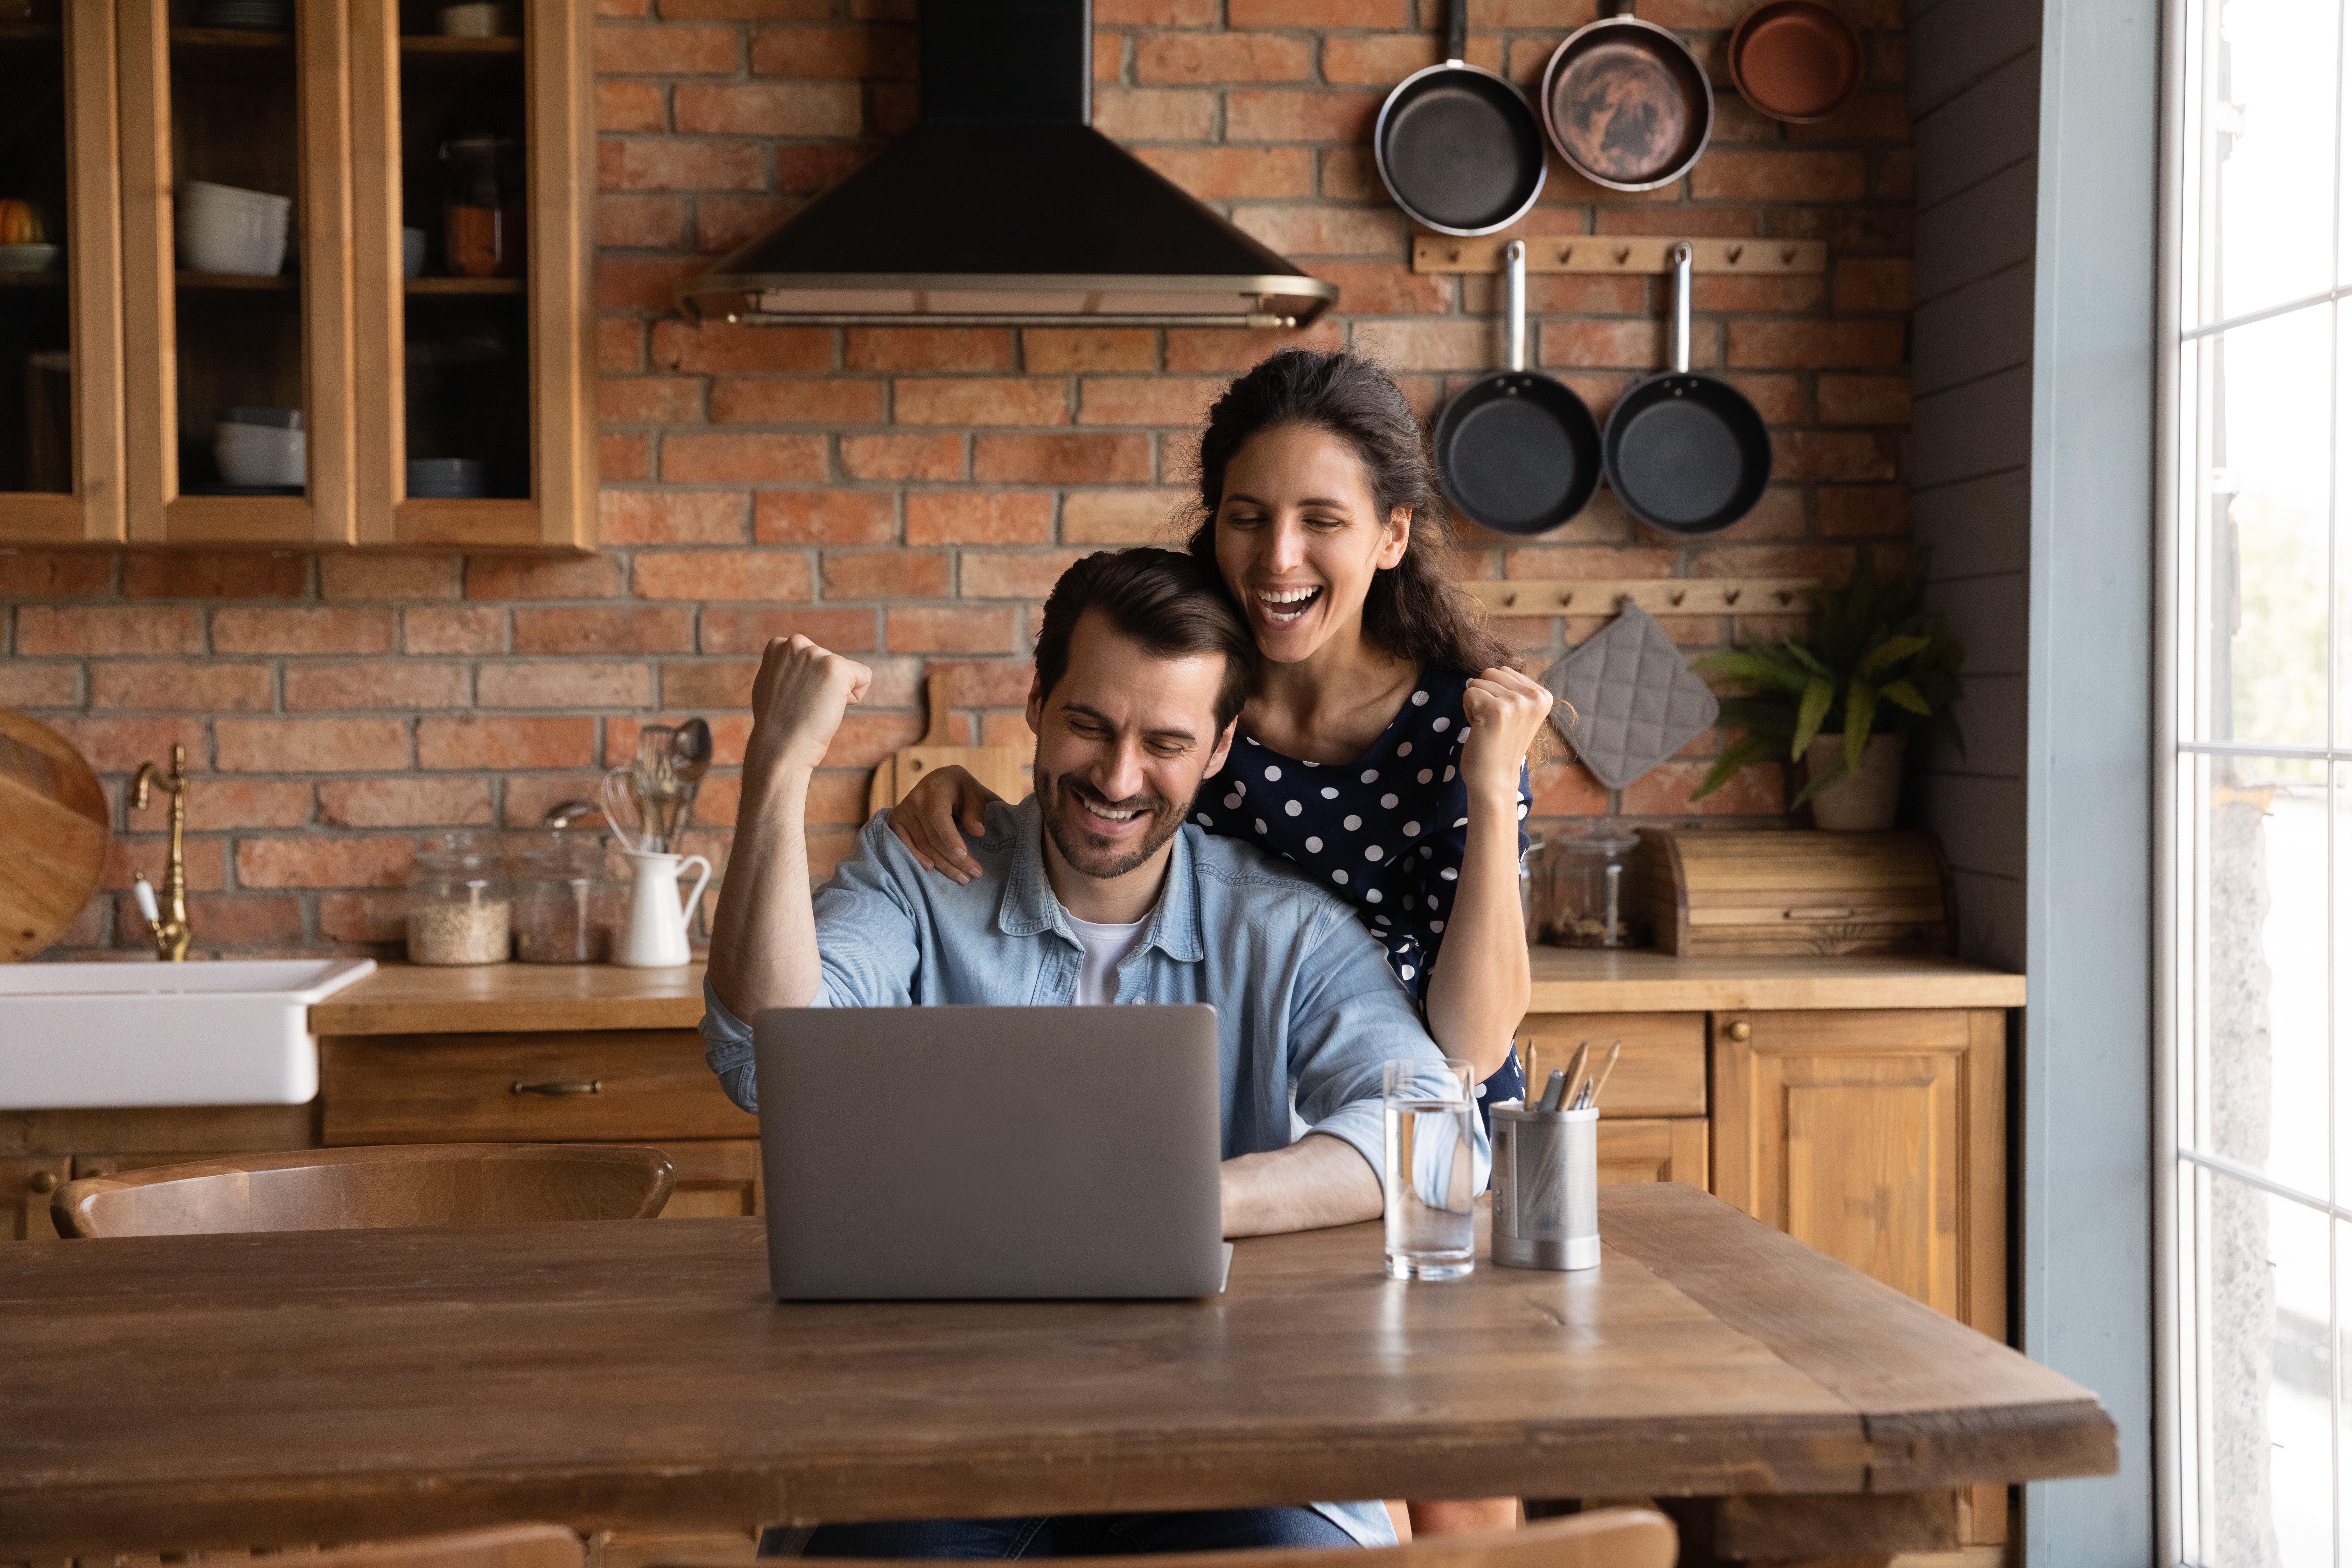 Man and woman excitedly looking at a laptop